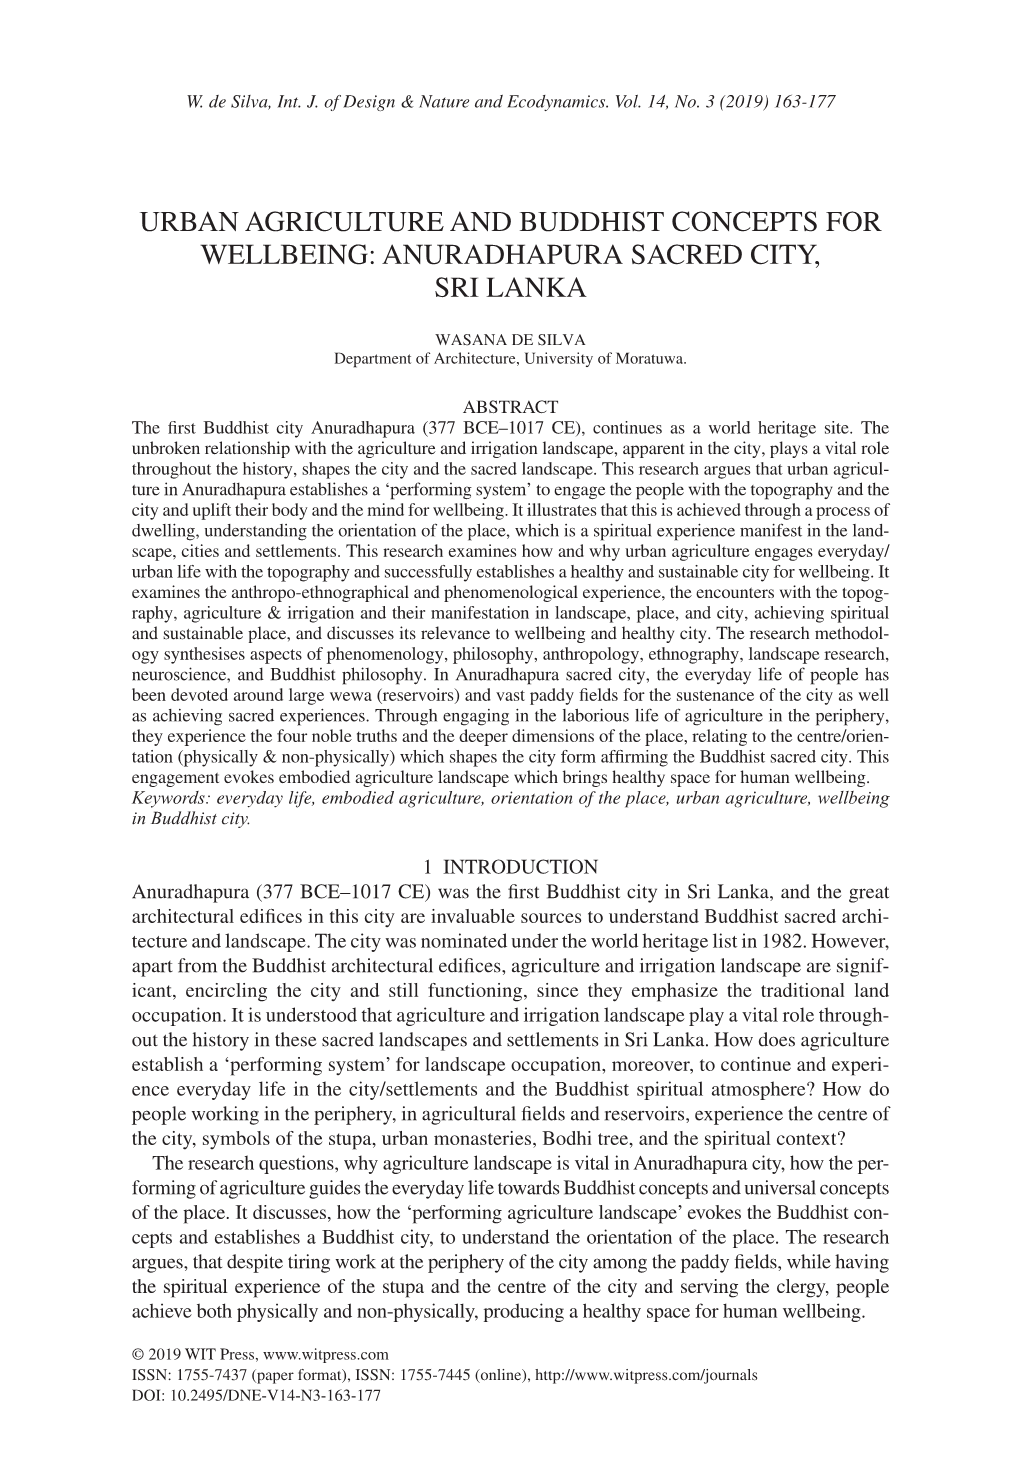 Urban Agriculture and Buddhist Concepts for Wellbeing: Anuradhapura Sacred City, Sri Lanka